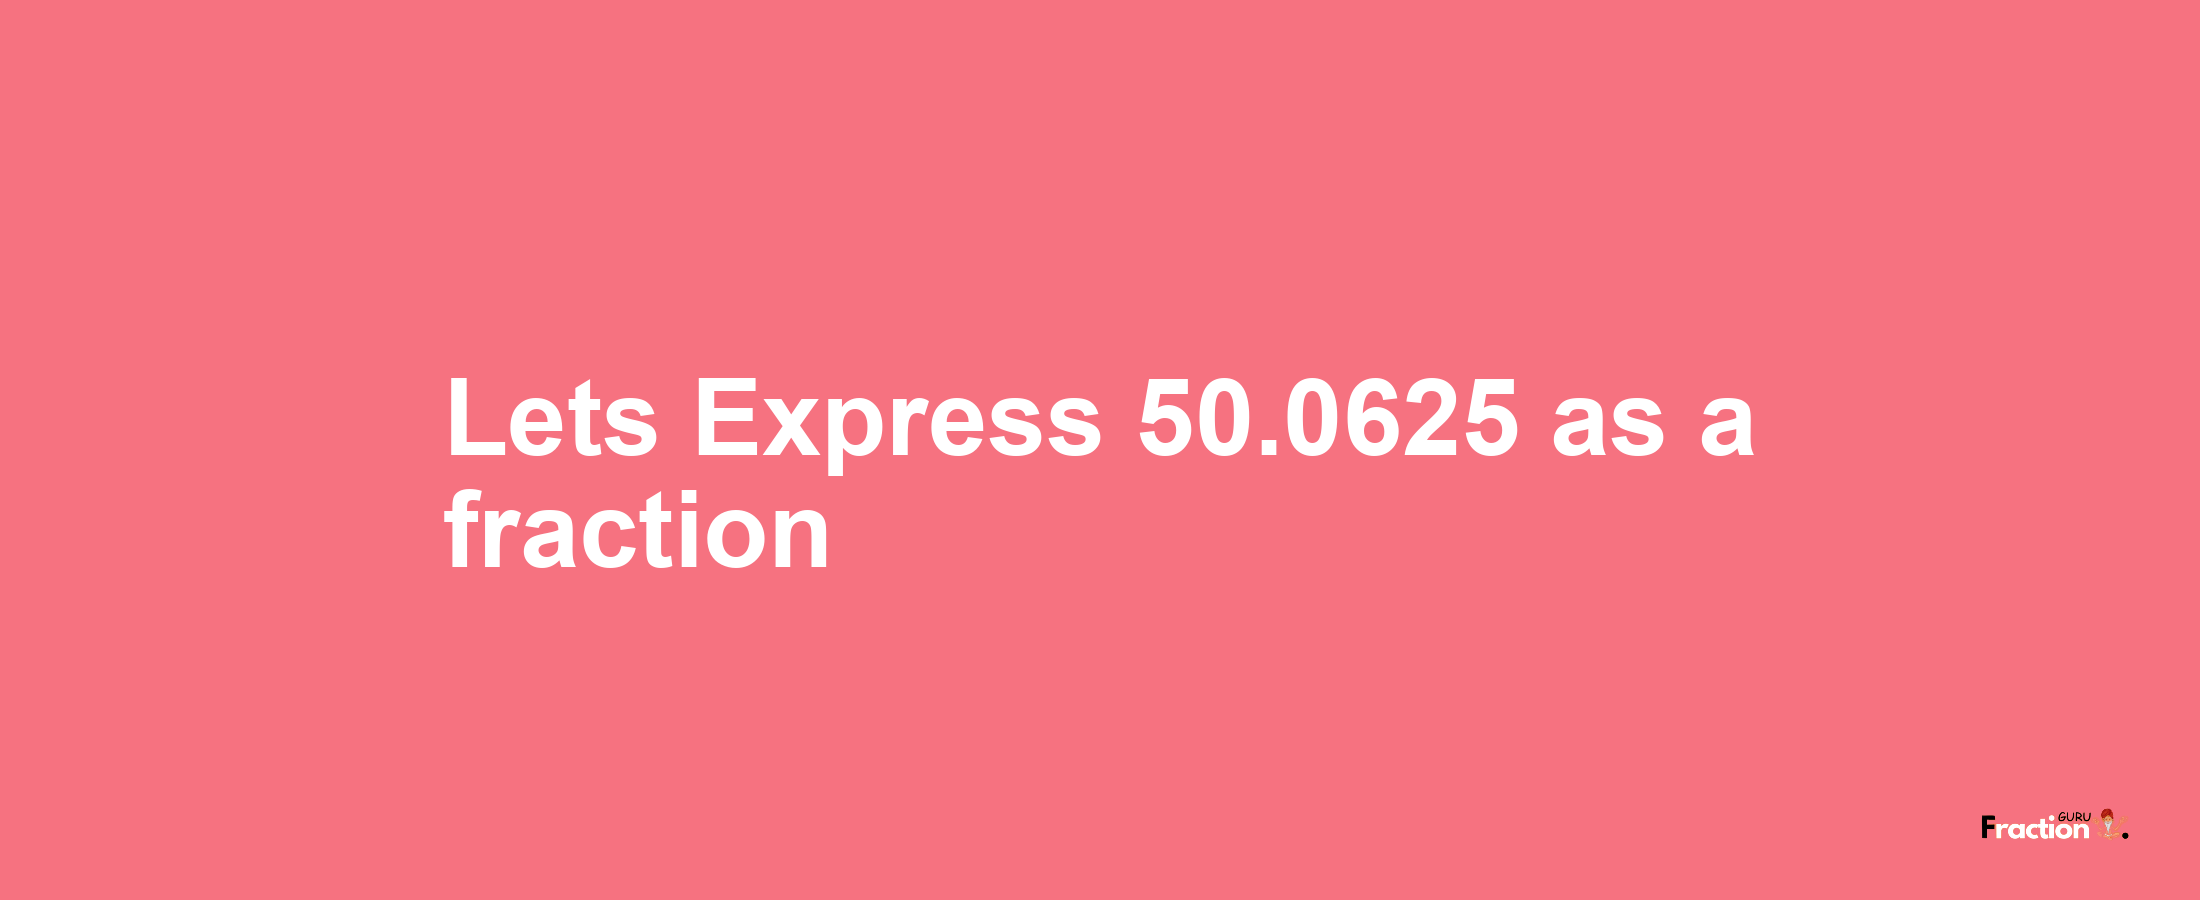 Lets Express 50.0625 as afraction